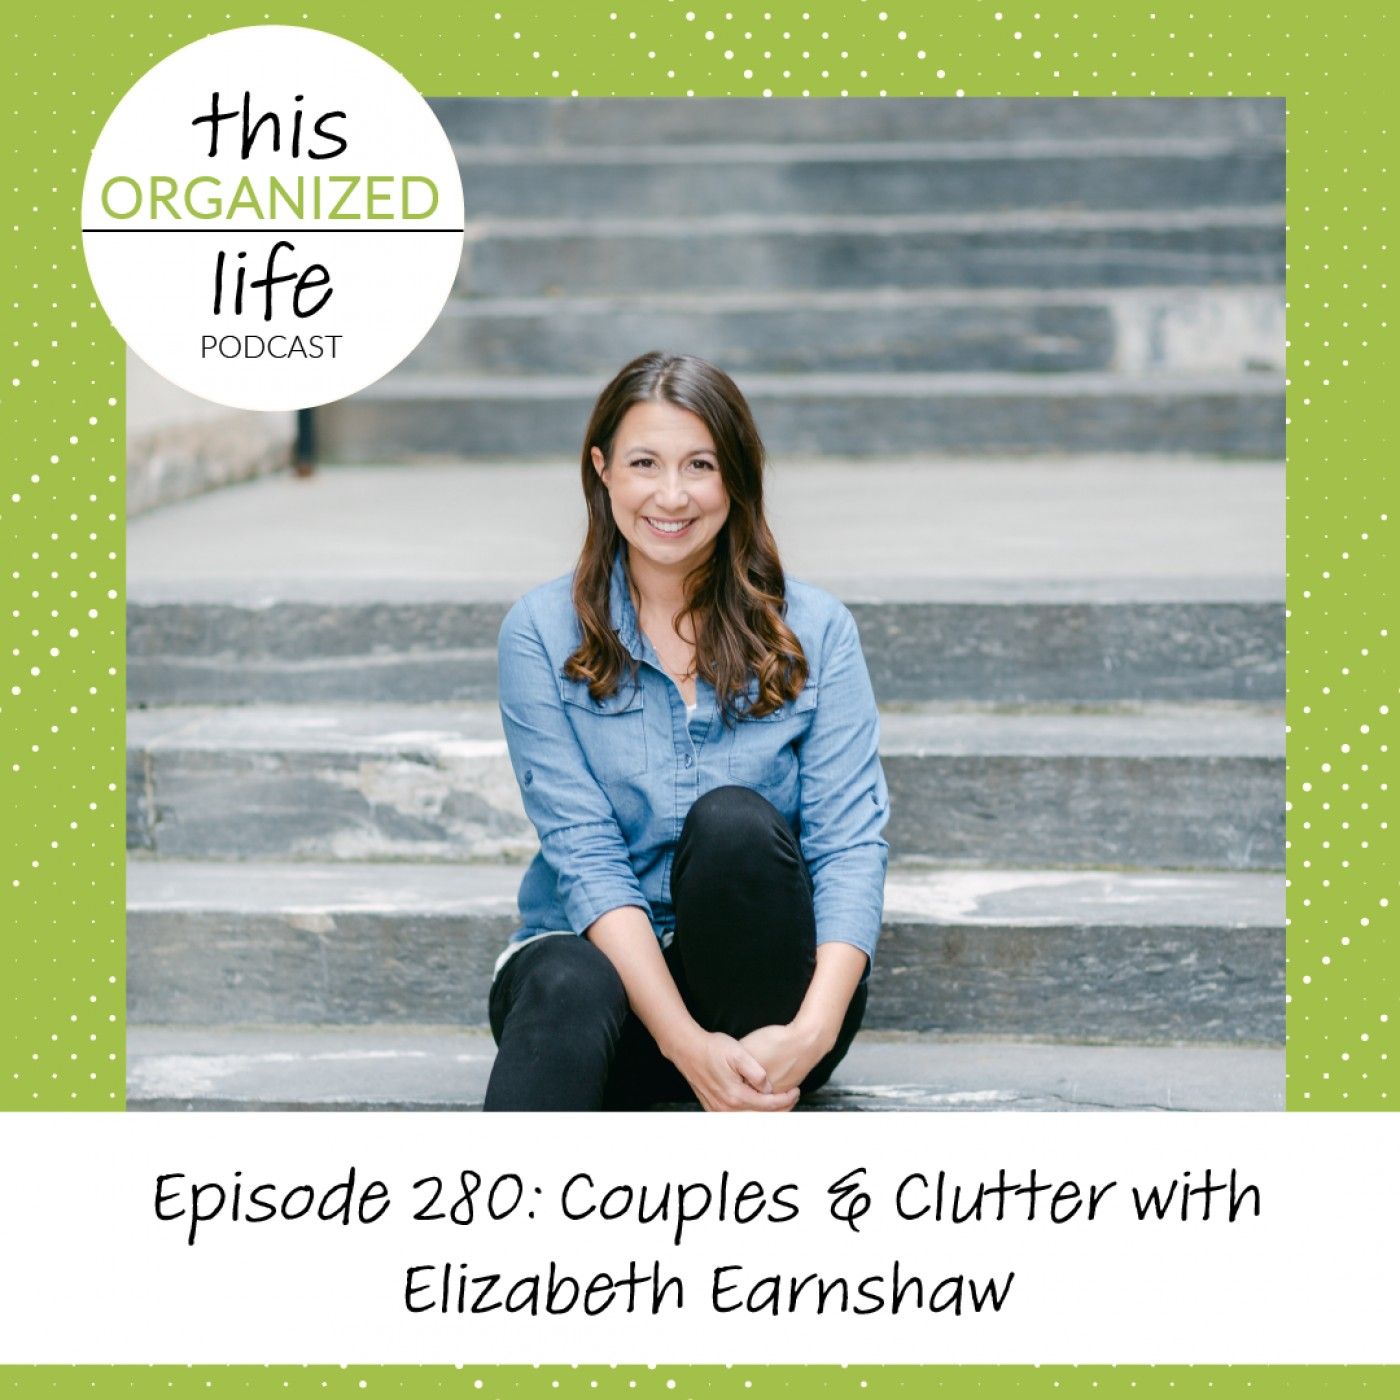 Ep 280: Couples and Clutter with Elizabeth Earnshaw